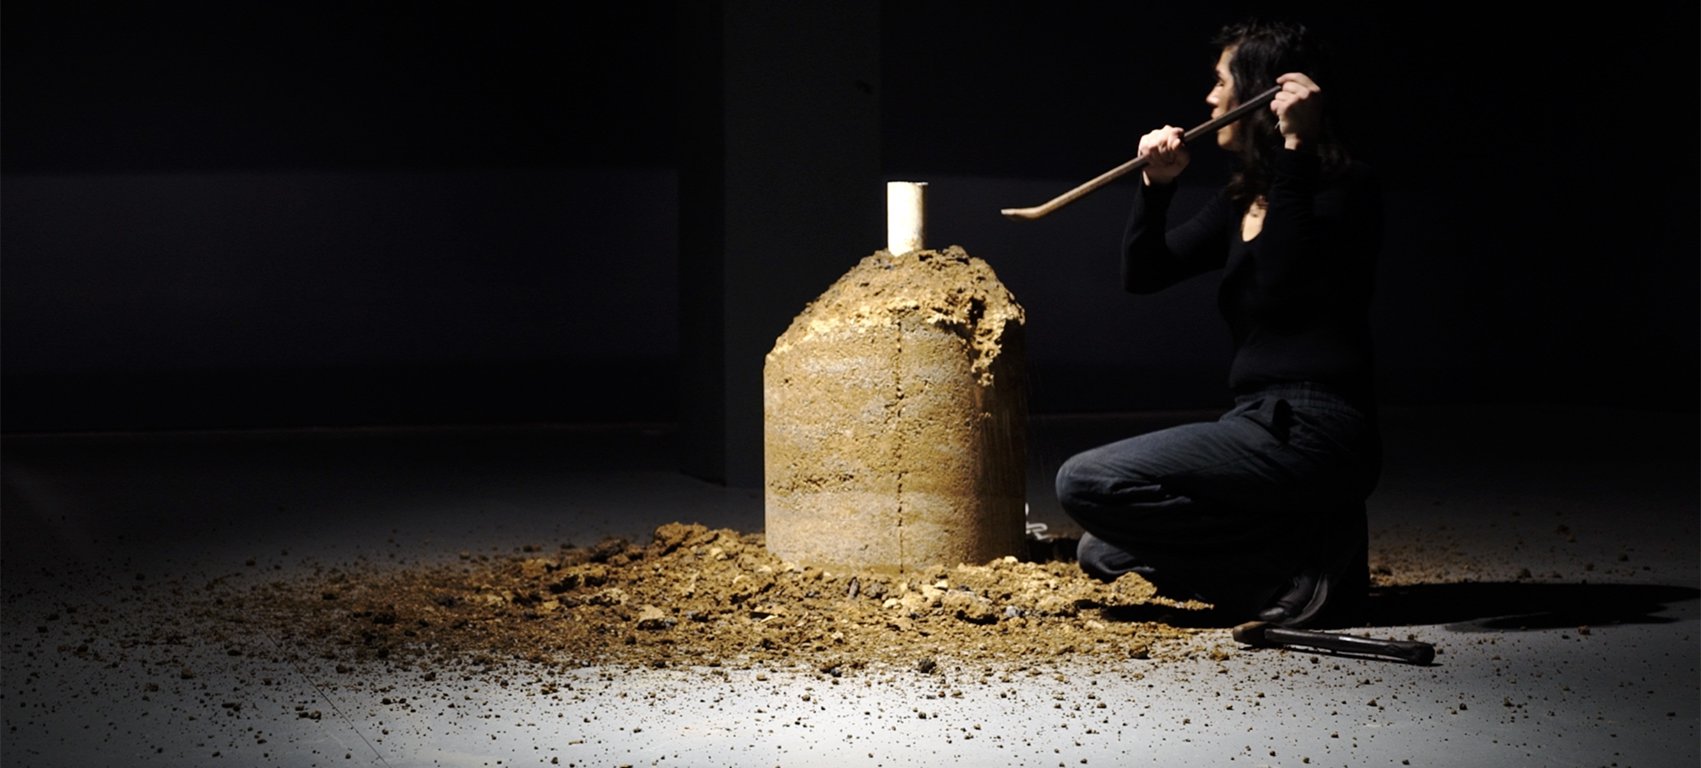 A photo of Selena de Carvalho deinstalling her past work named 'Readymade Burnouts. Selena is kneeling on the ground in a darkened room and using a crowbar to break down a rammed earth pillar. Credit courtesy of artist.